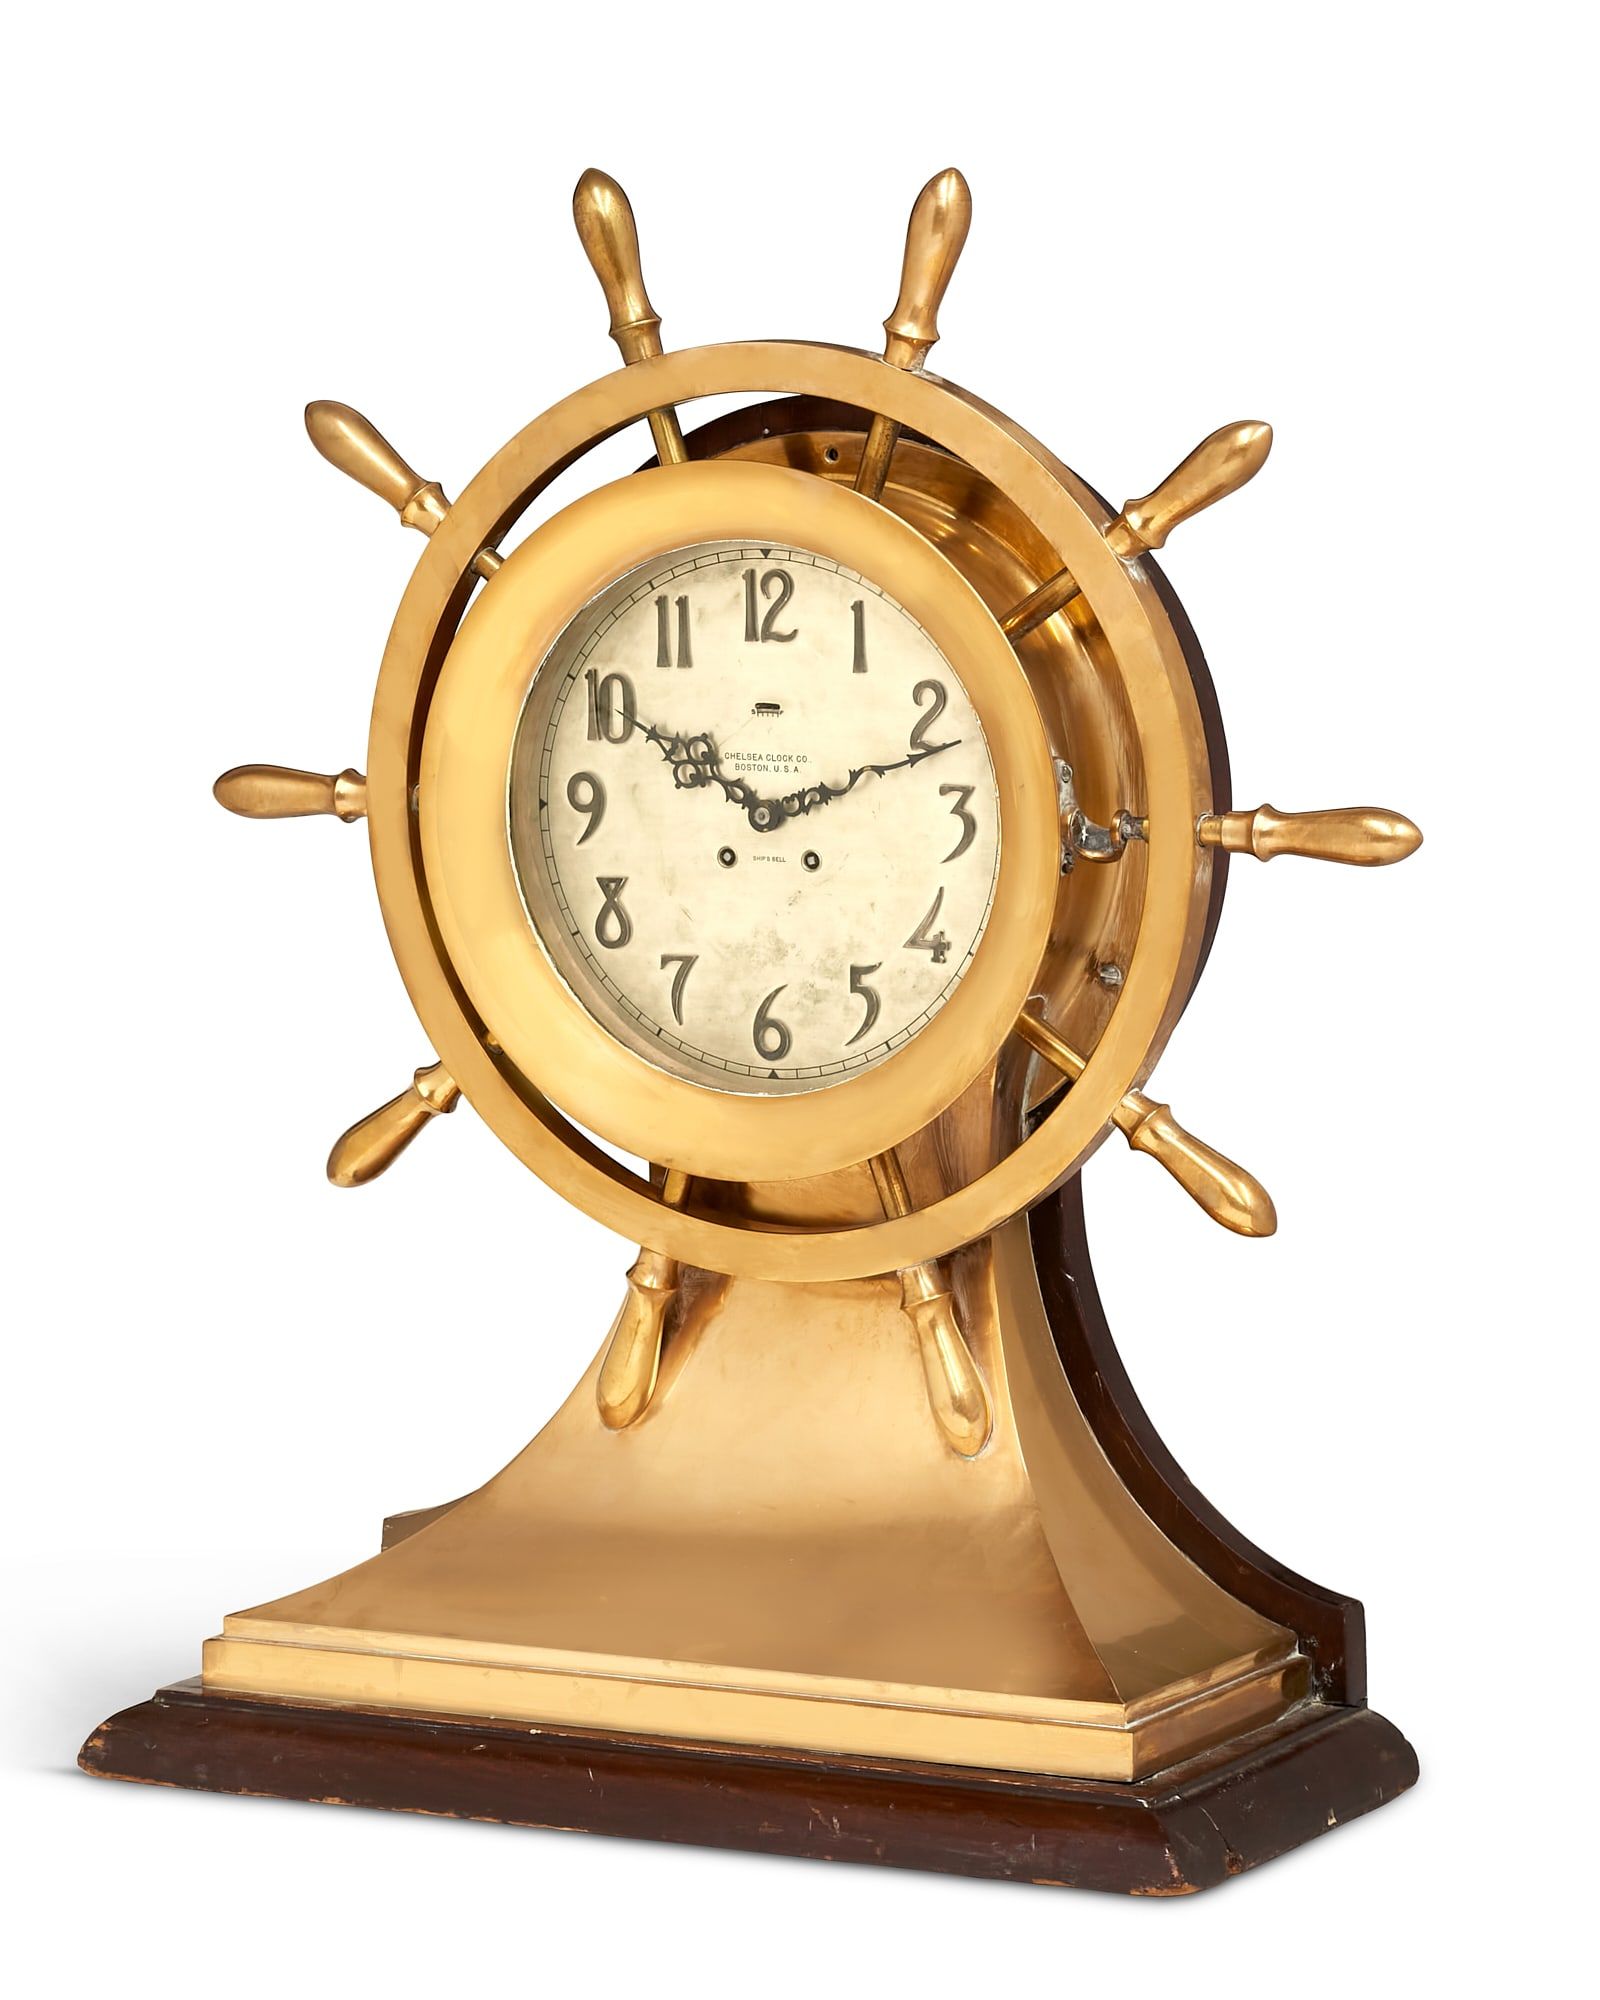 LARGE CHELSEA CLOCK CO. BRASS SHIPS